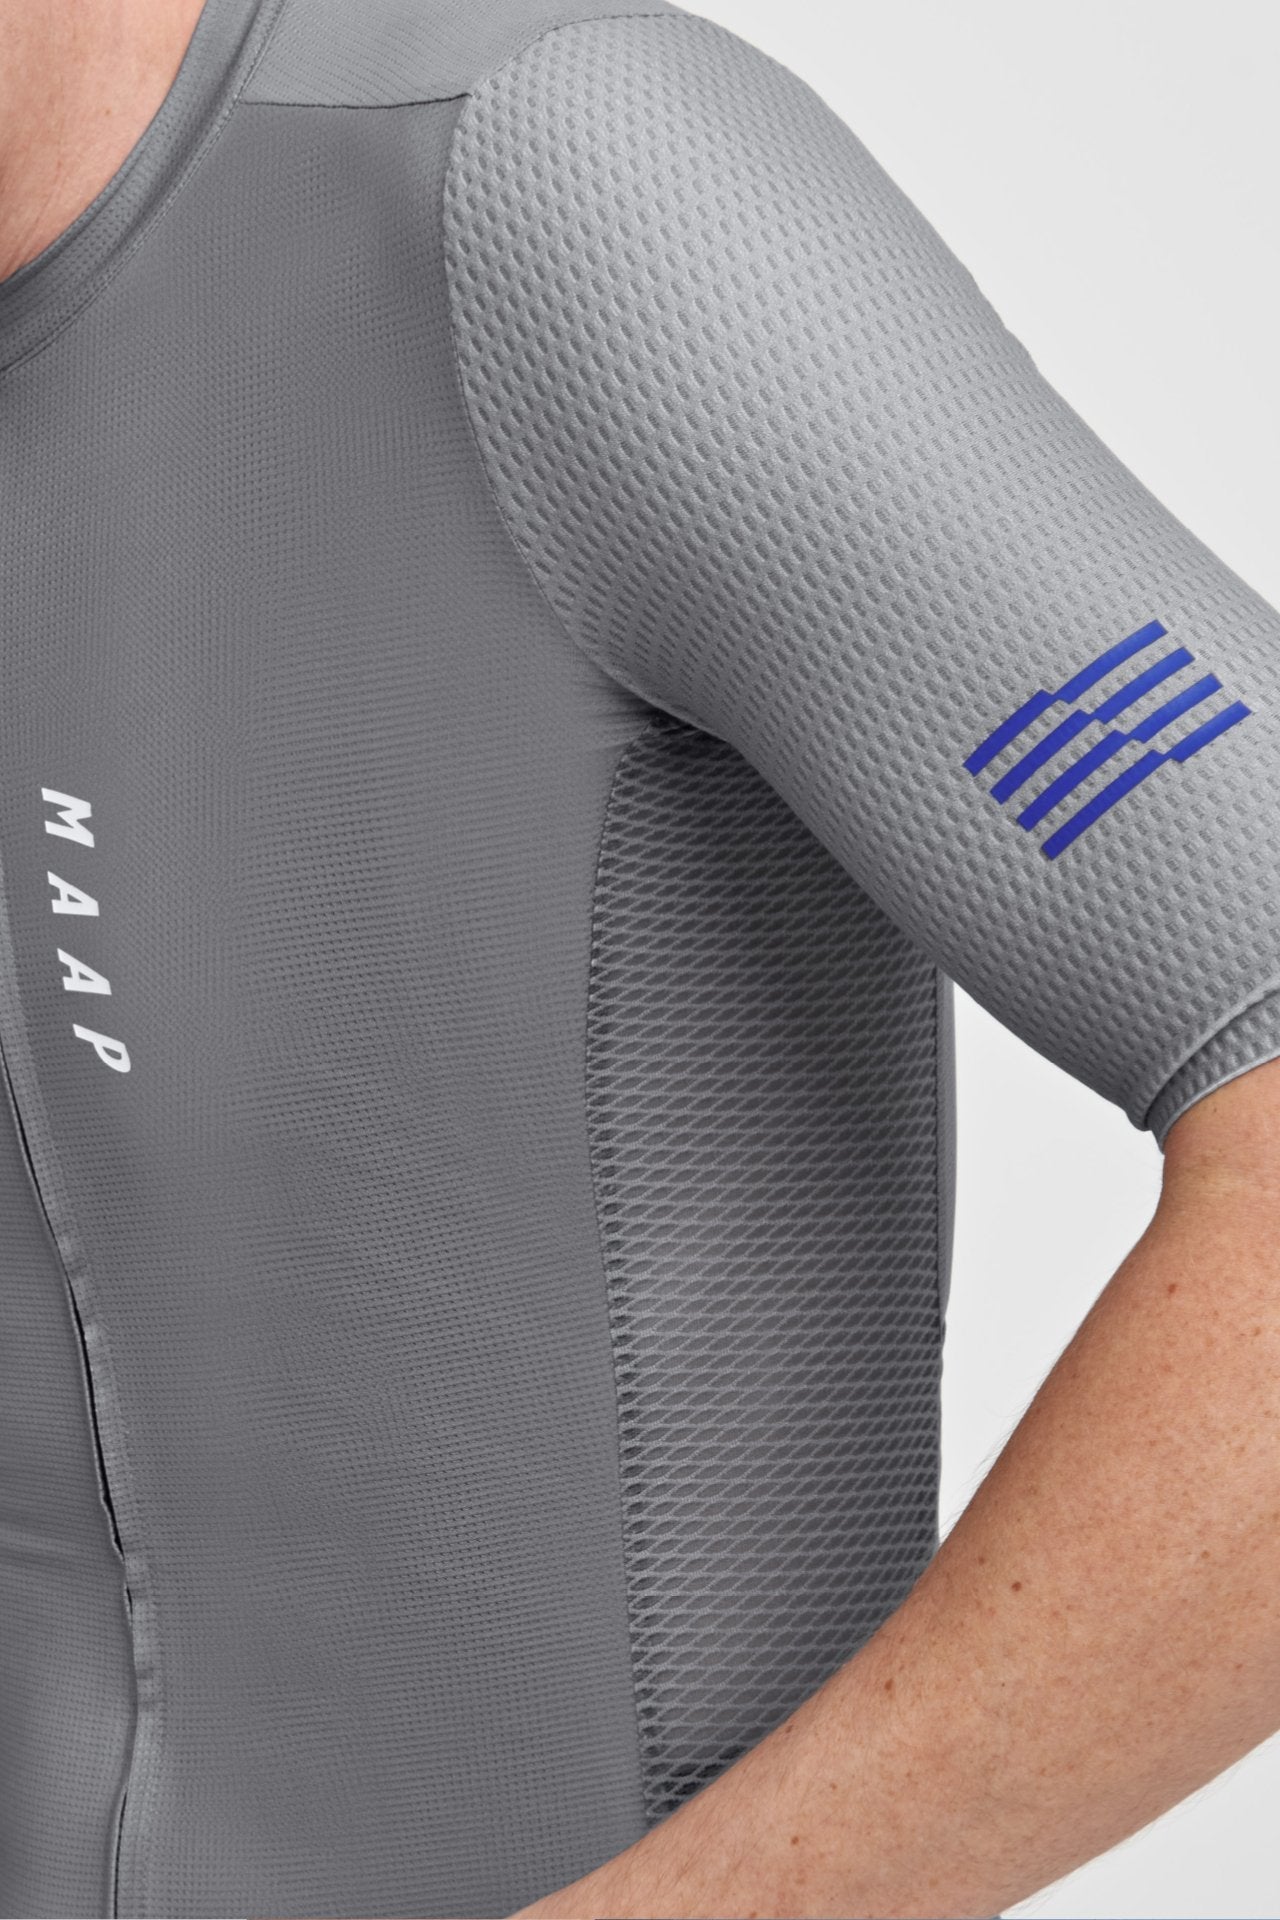 Stealth Race Fit Jersey - MAAP Cycling Apparel